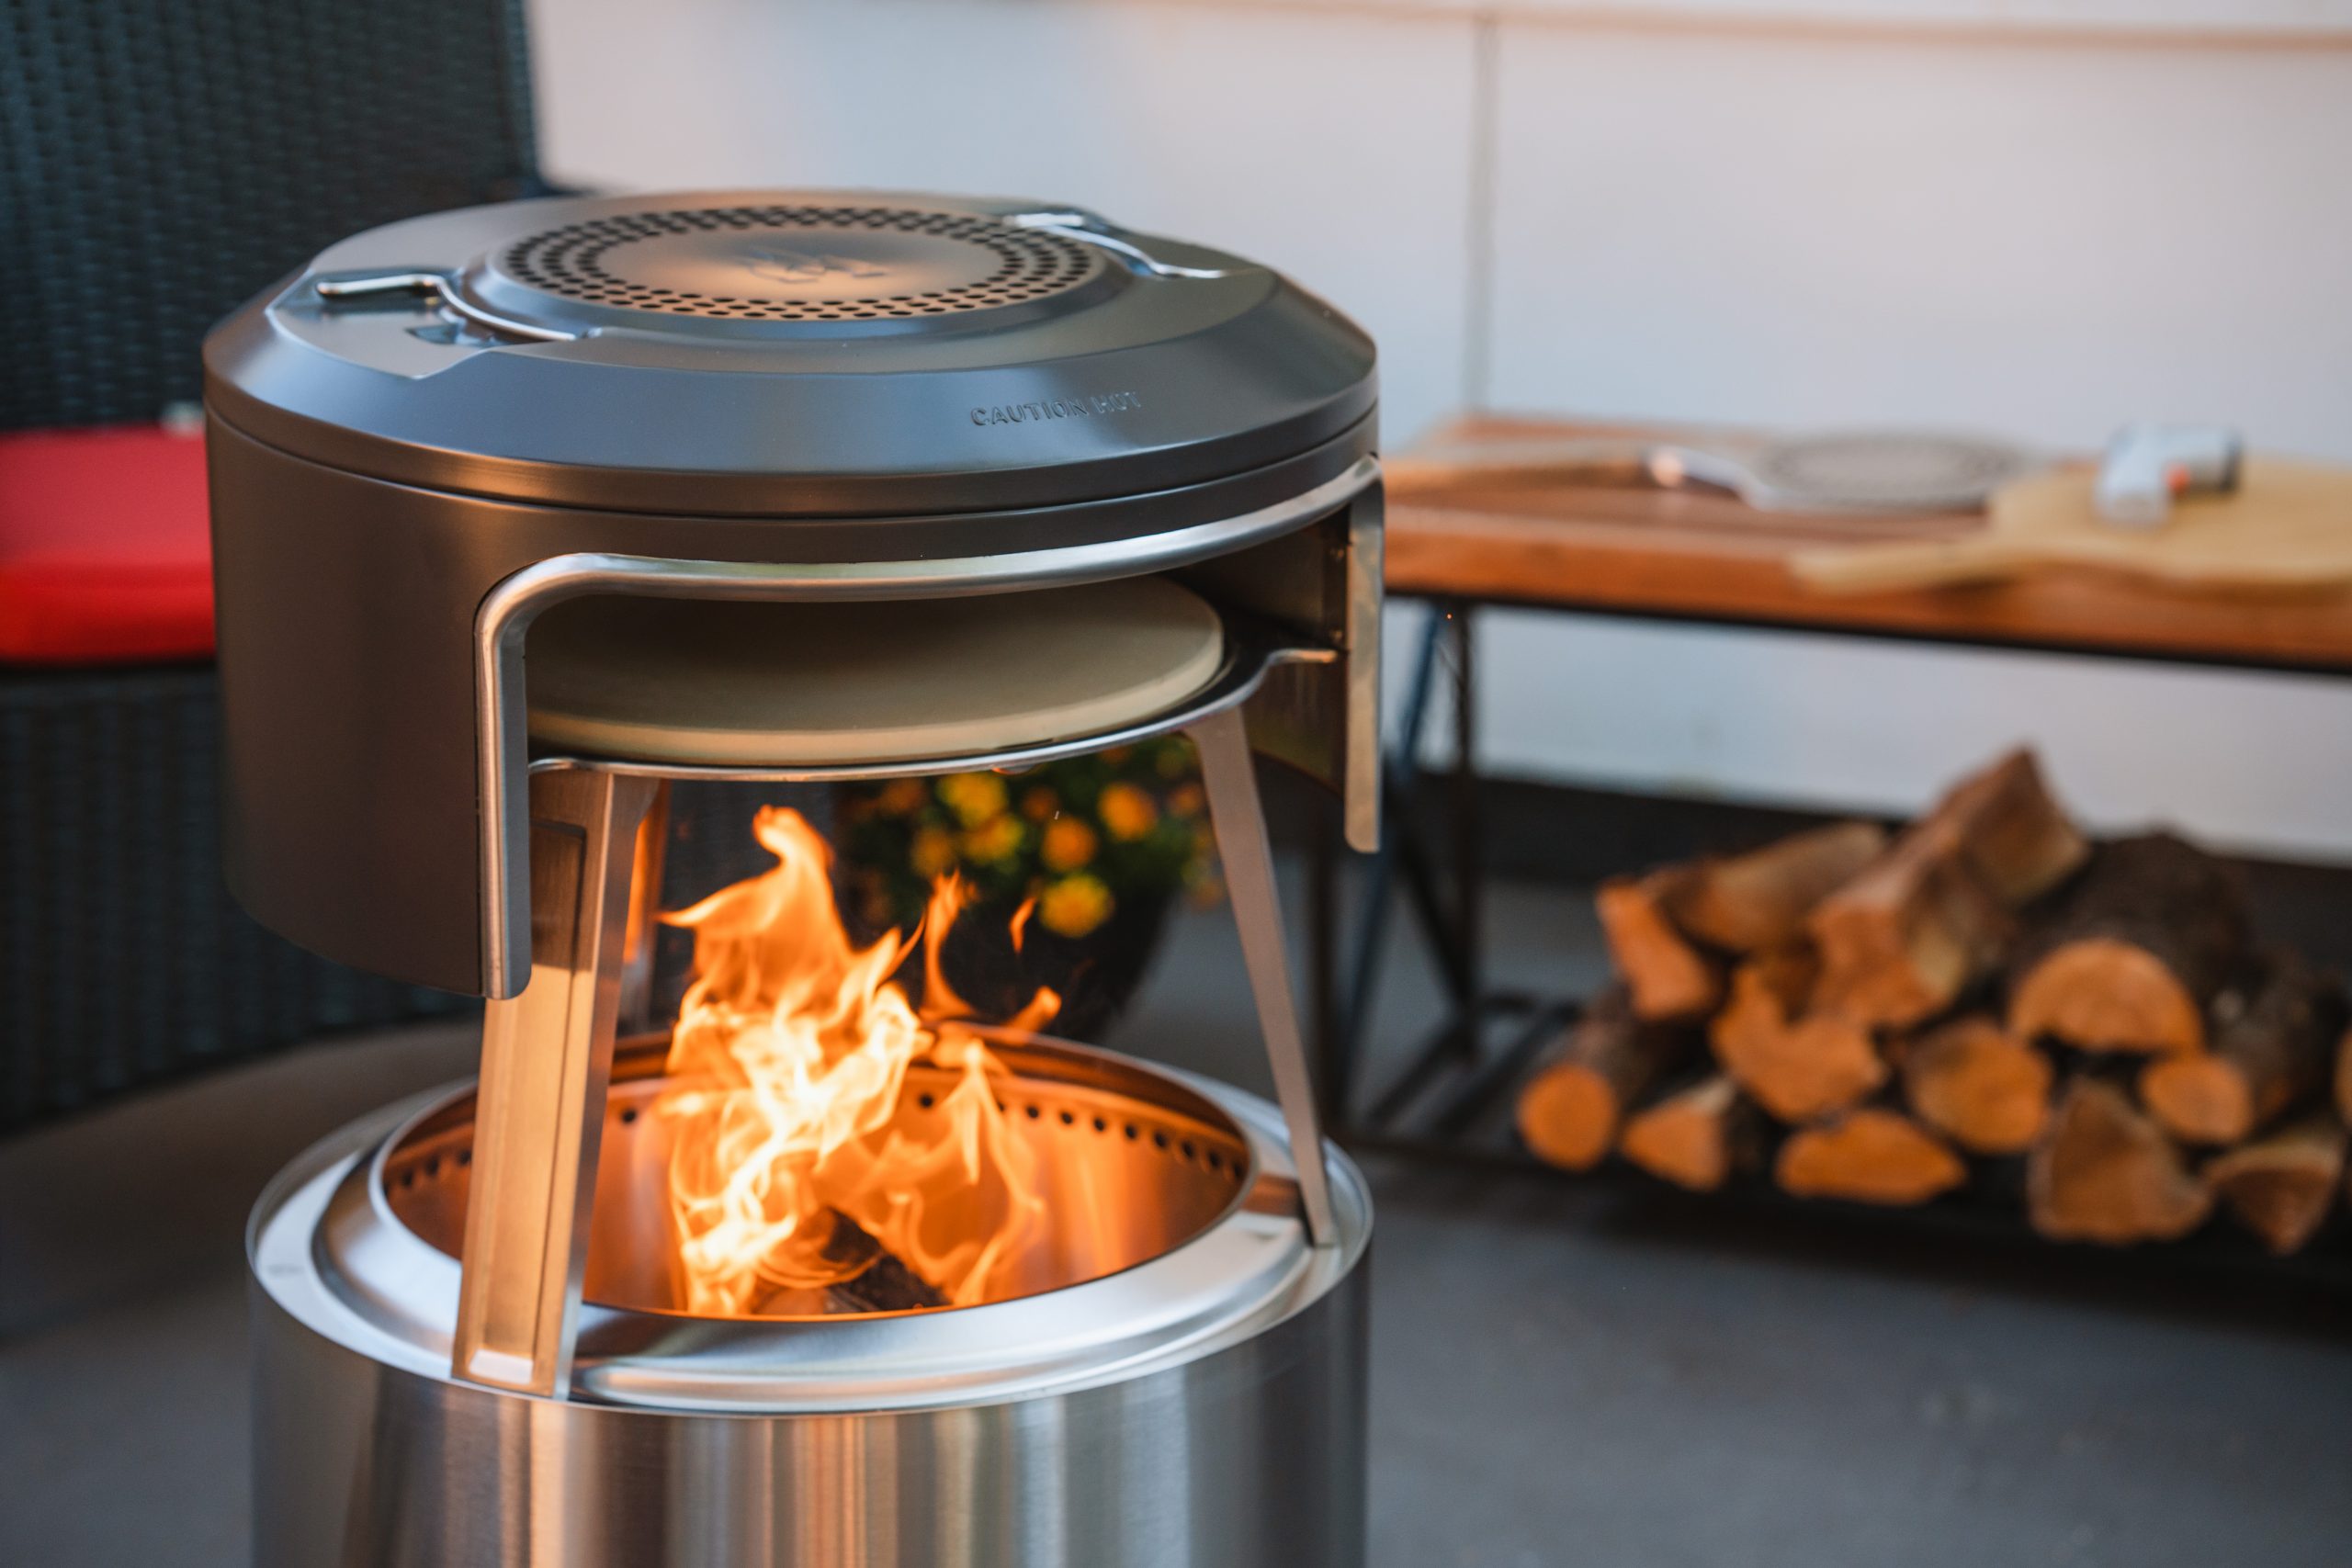 Solostove's Pi Fire Pizza Ovens For Your Solostove Fire Pit